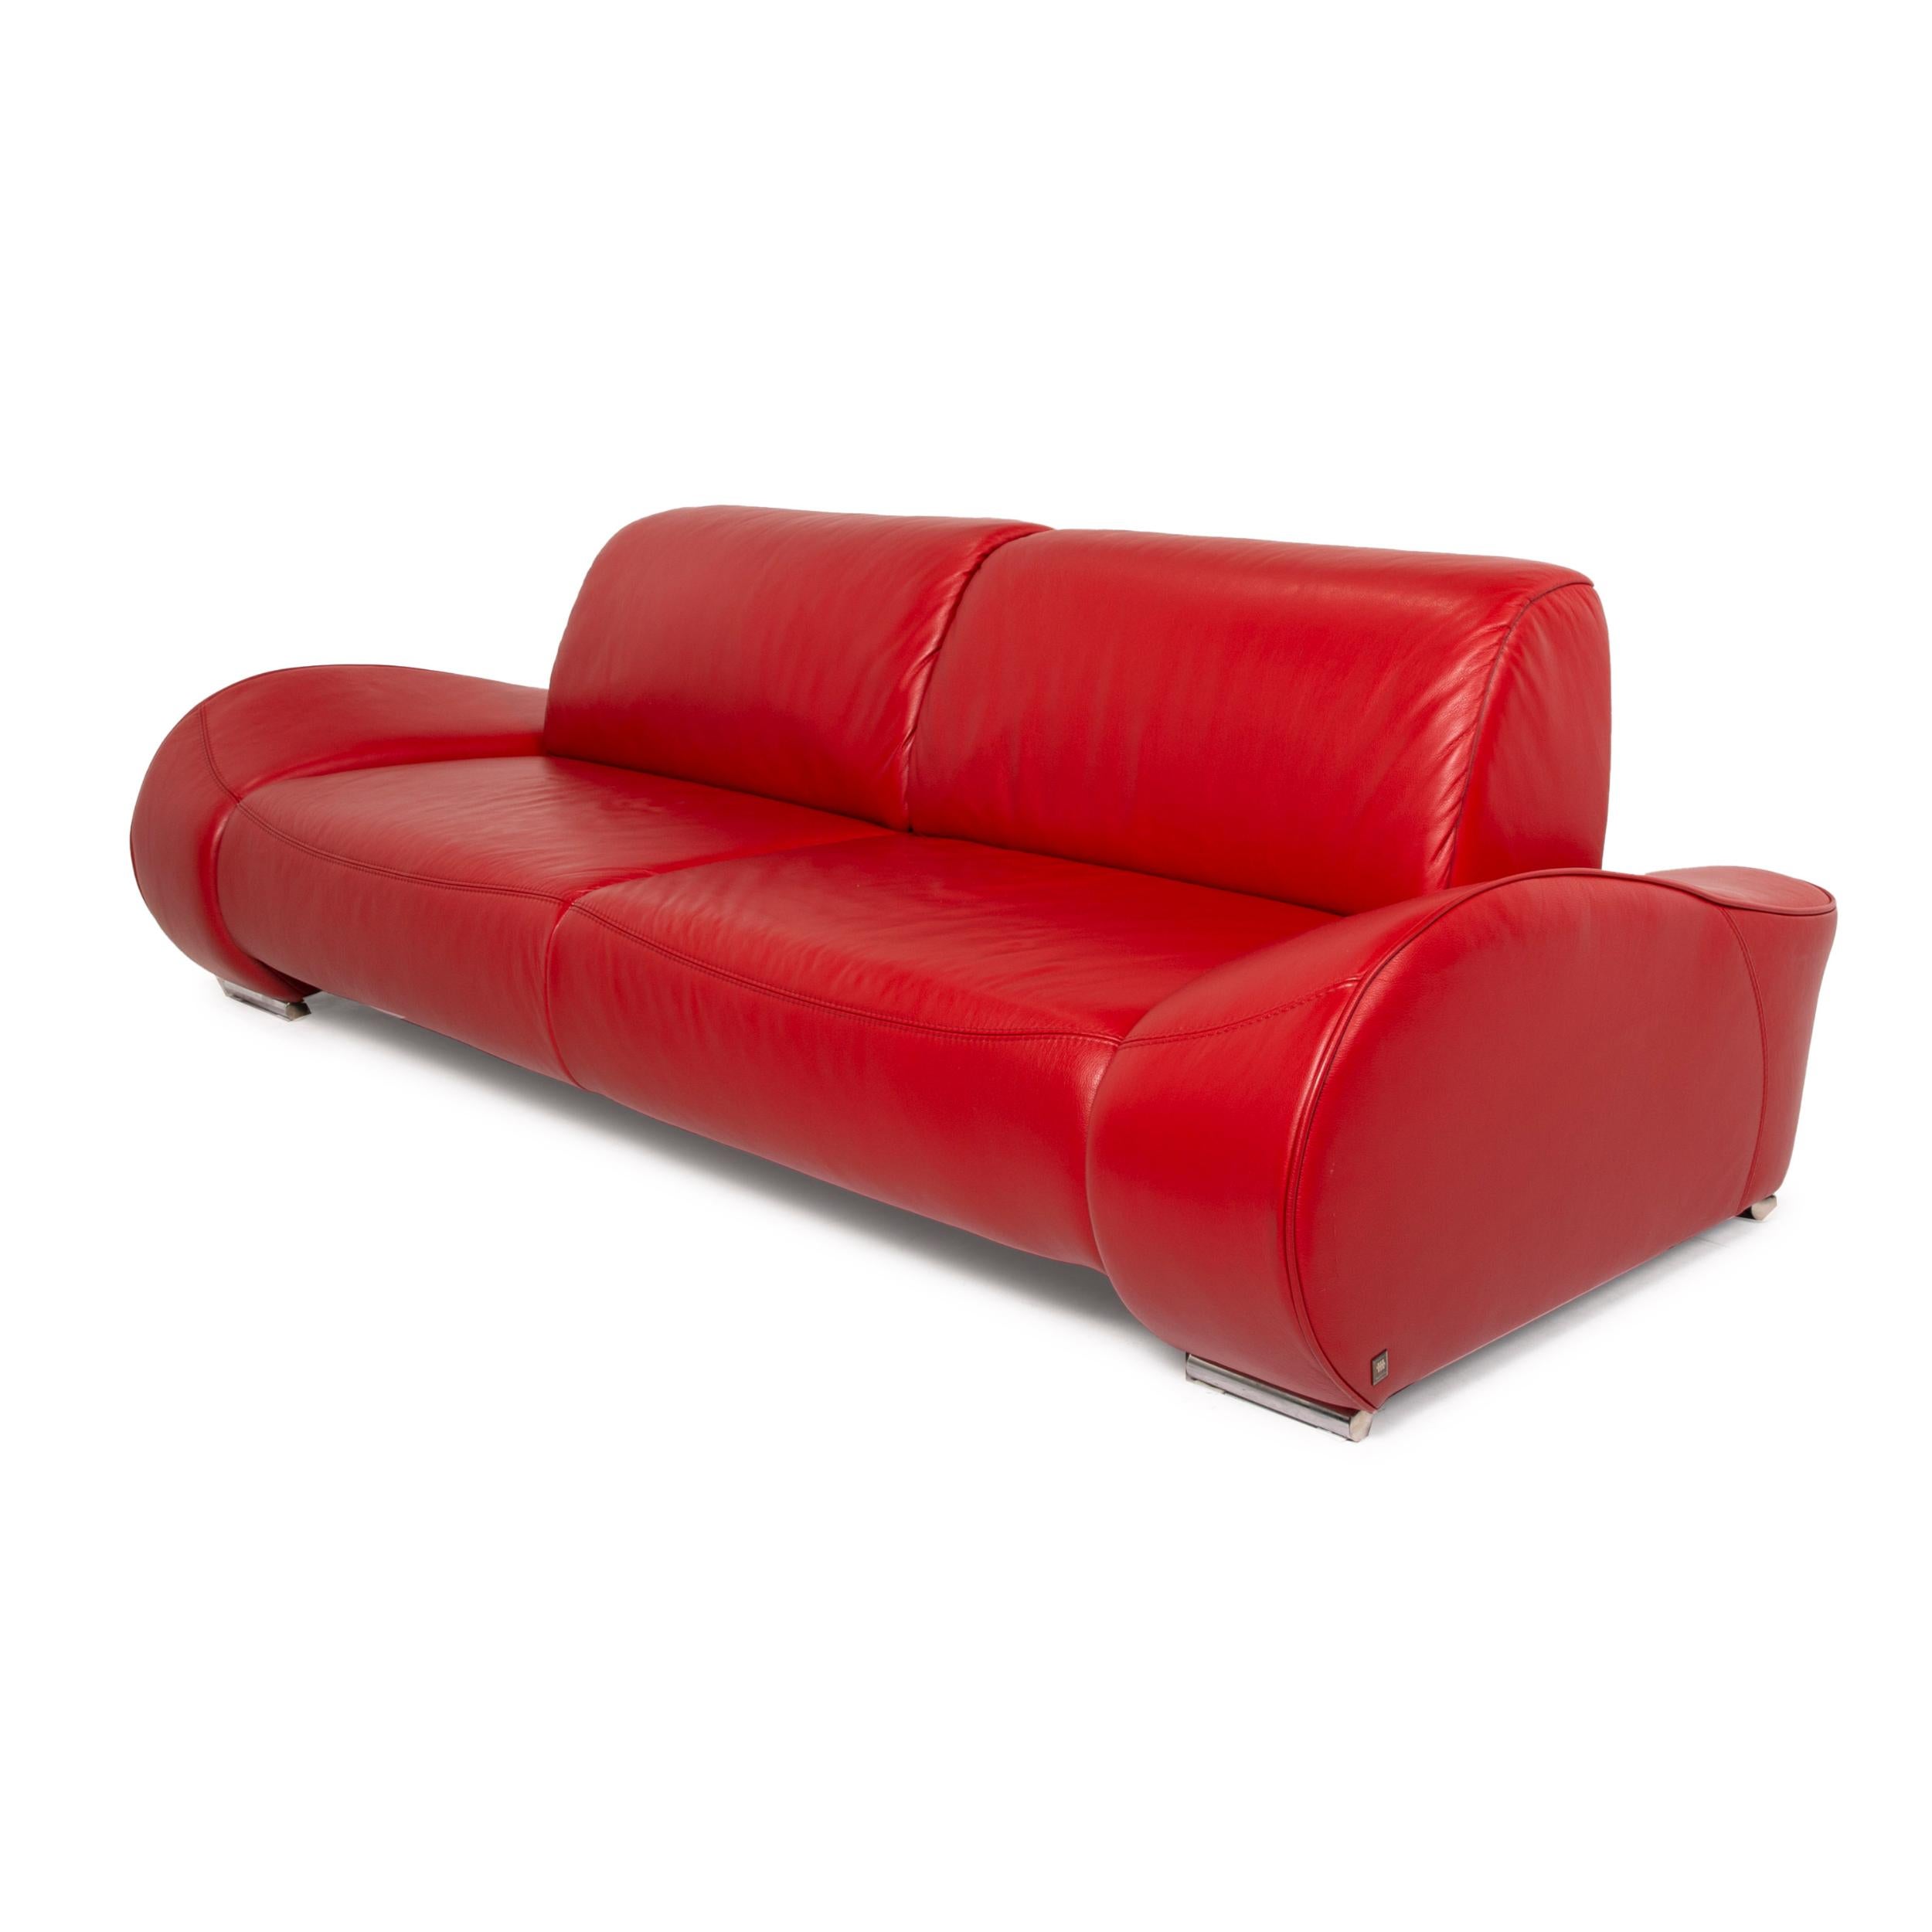 Modern Musterring Mr-740 Leather Sofa Red Three-Seater Function